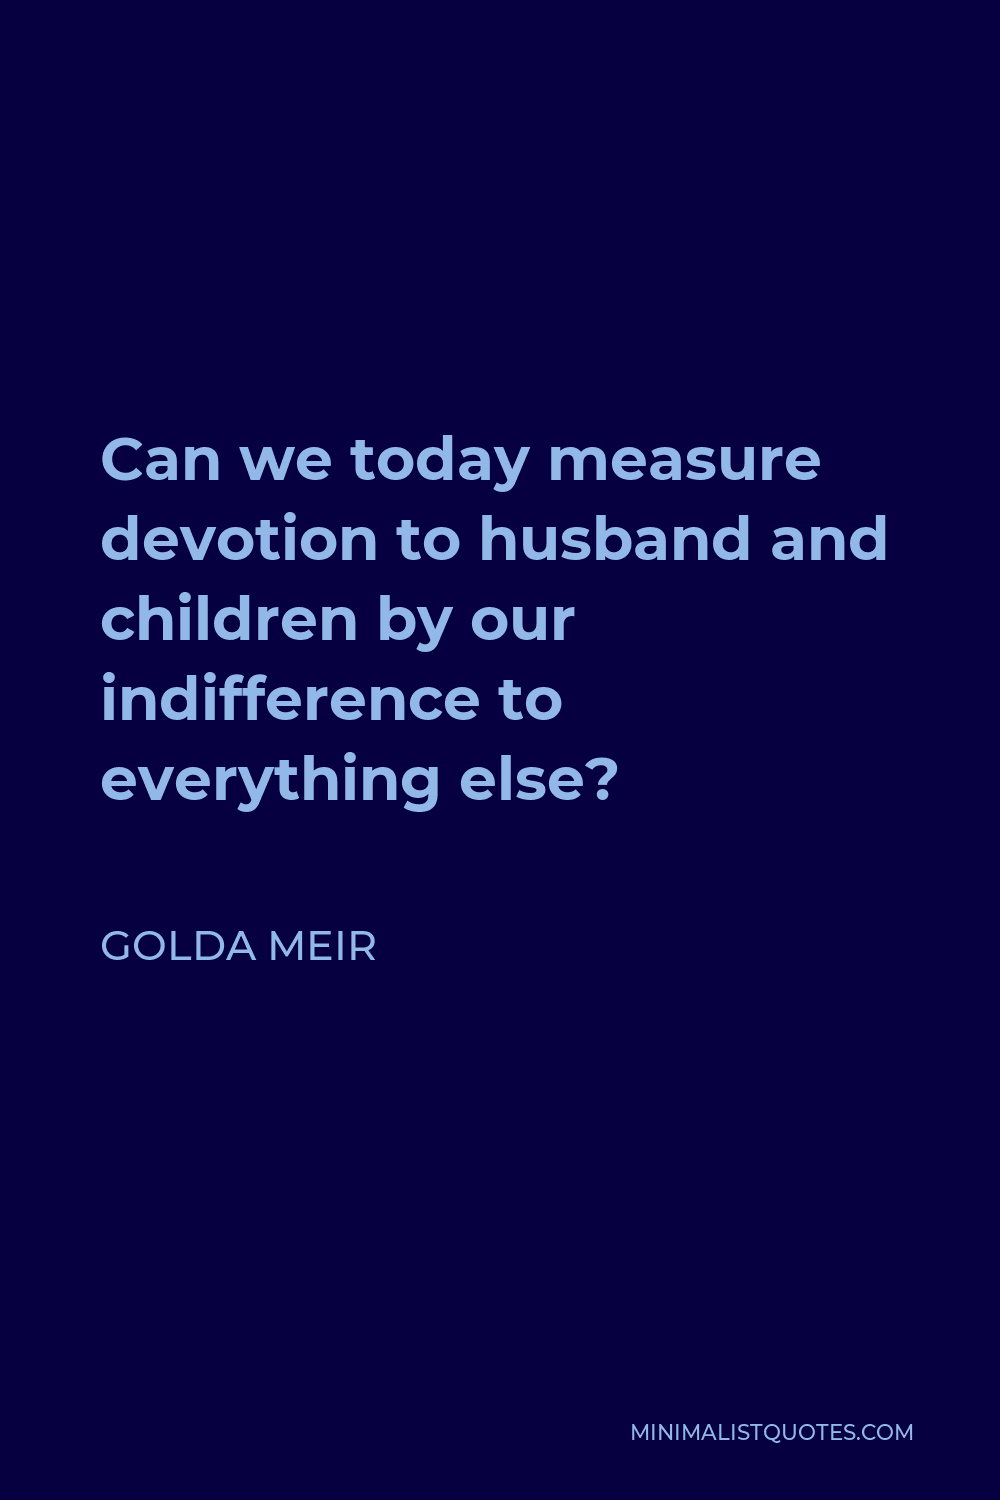 Golda Meir Quote - Can we today measure devotion to husband and children by our indifference to everything else?